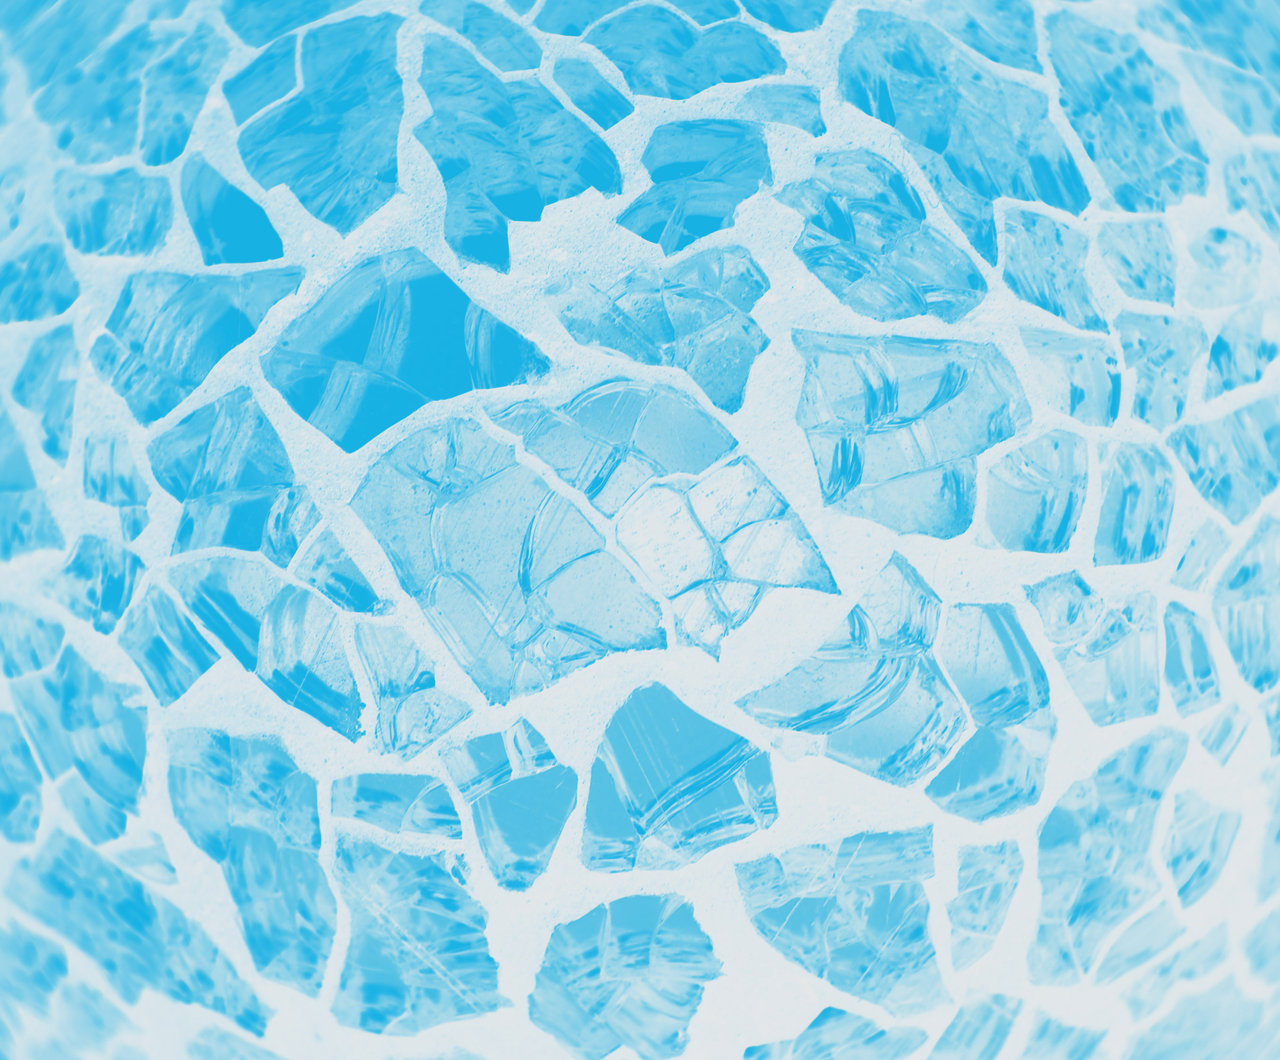 Ice texture, frozen water images, free download.